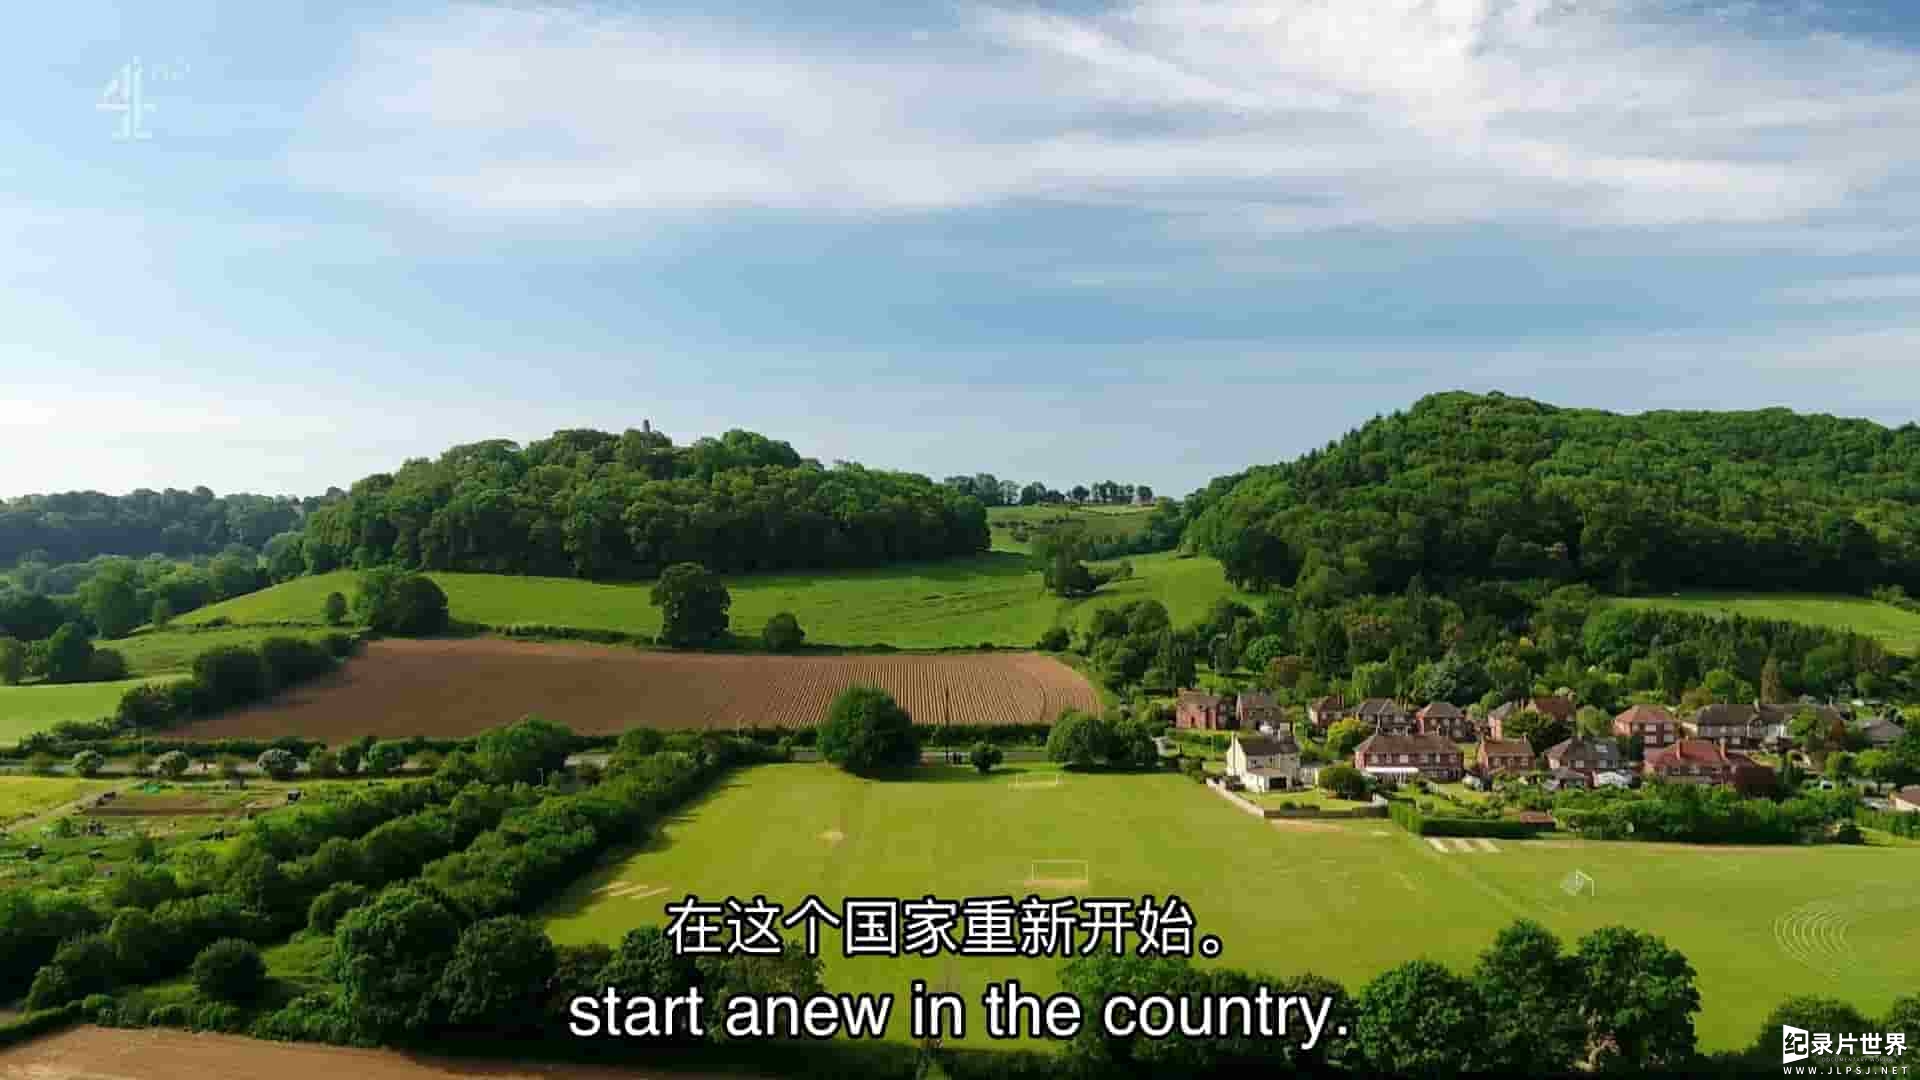  CH4纪录片《莎拉·比尼在乡村的新生活 Sarah Beeny's New Life in the Country 2020》第1-2季全17集